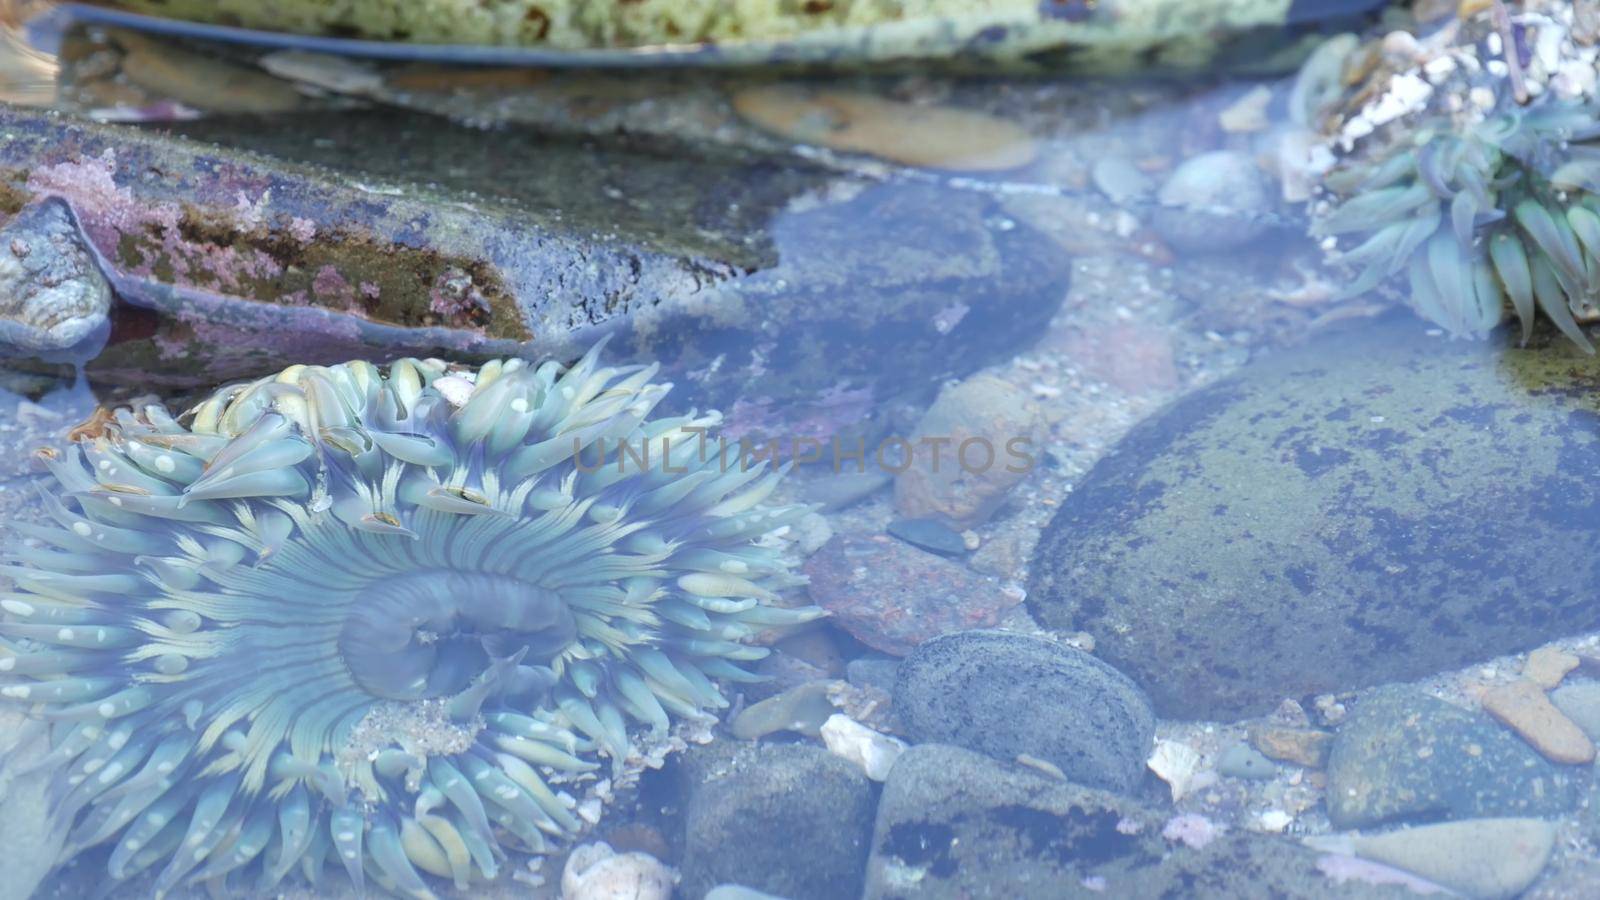 Sea anemone tentacles in tide pool water, anemones in tidepool. Actiniaria polyp by DogoraSun